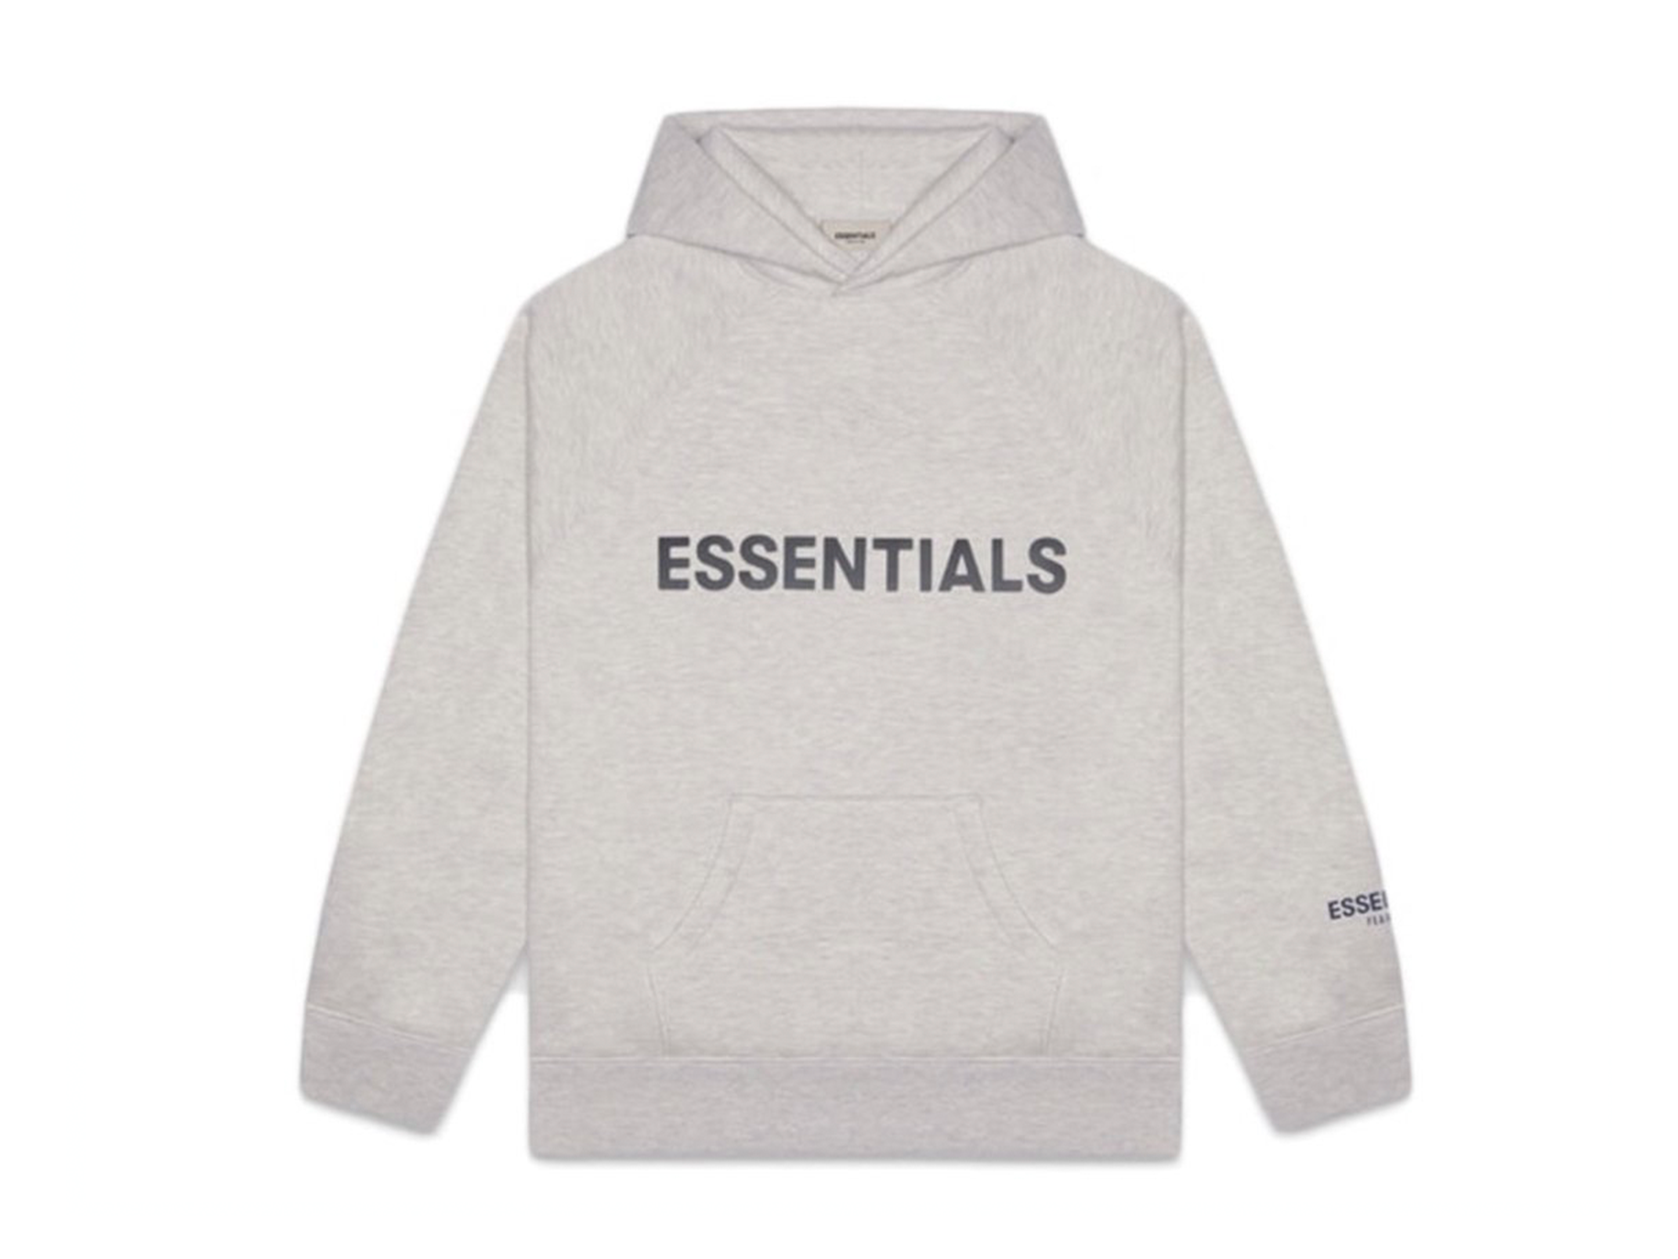 Double Boxed hoodie 199.99 FEAR OF GOD ESSENTIALS SS20 PULLOVER HOODIE LIGHT OATMEAL GREY Double Boxed